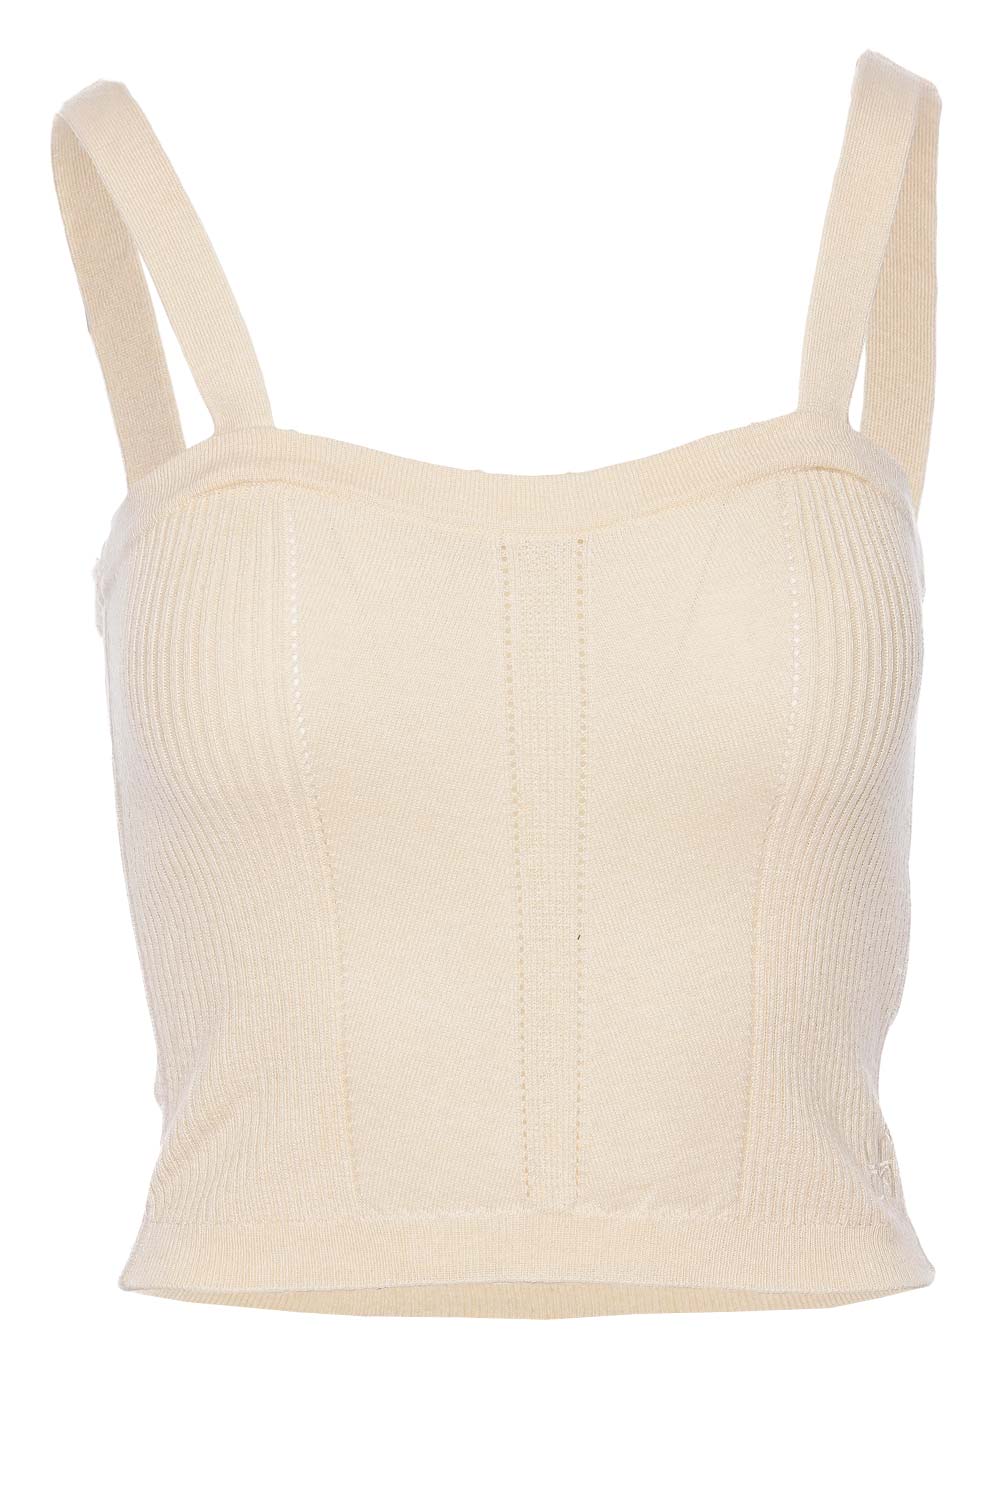 Ulla Johnson Giselle Chalk Knitted Crop Top